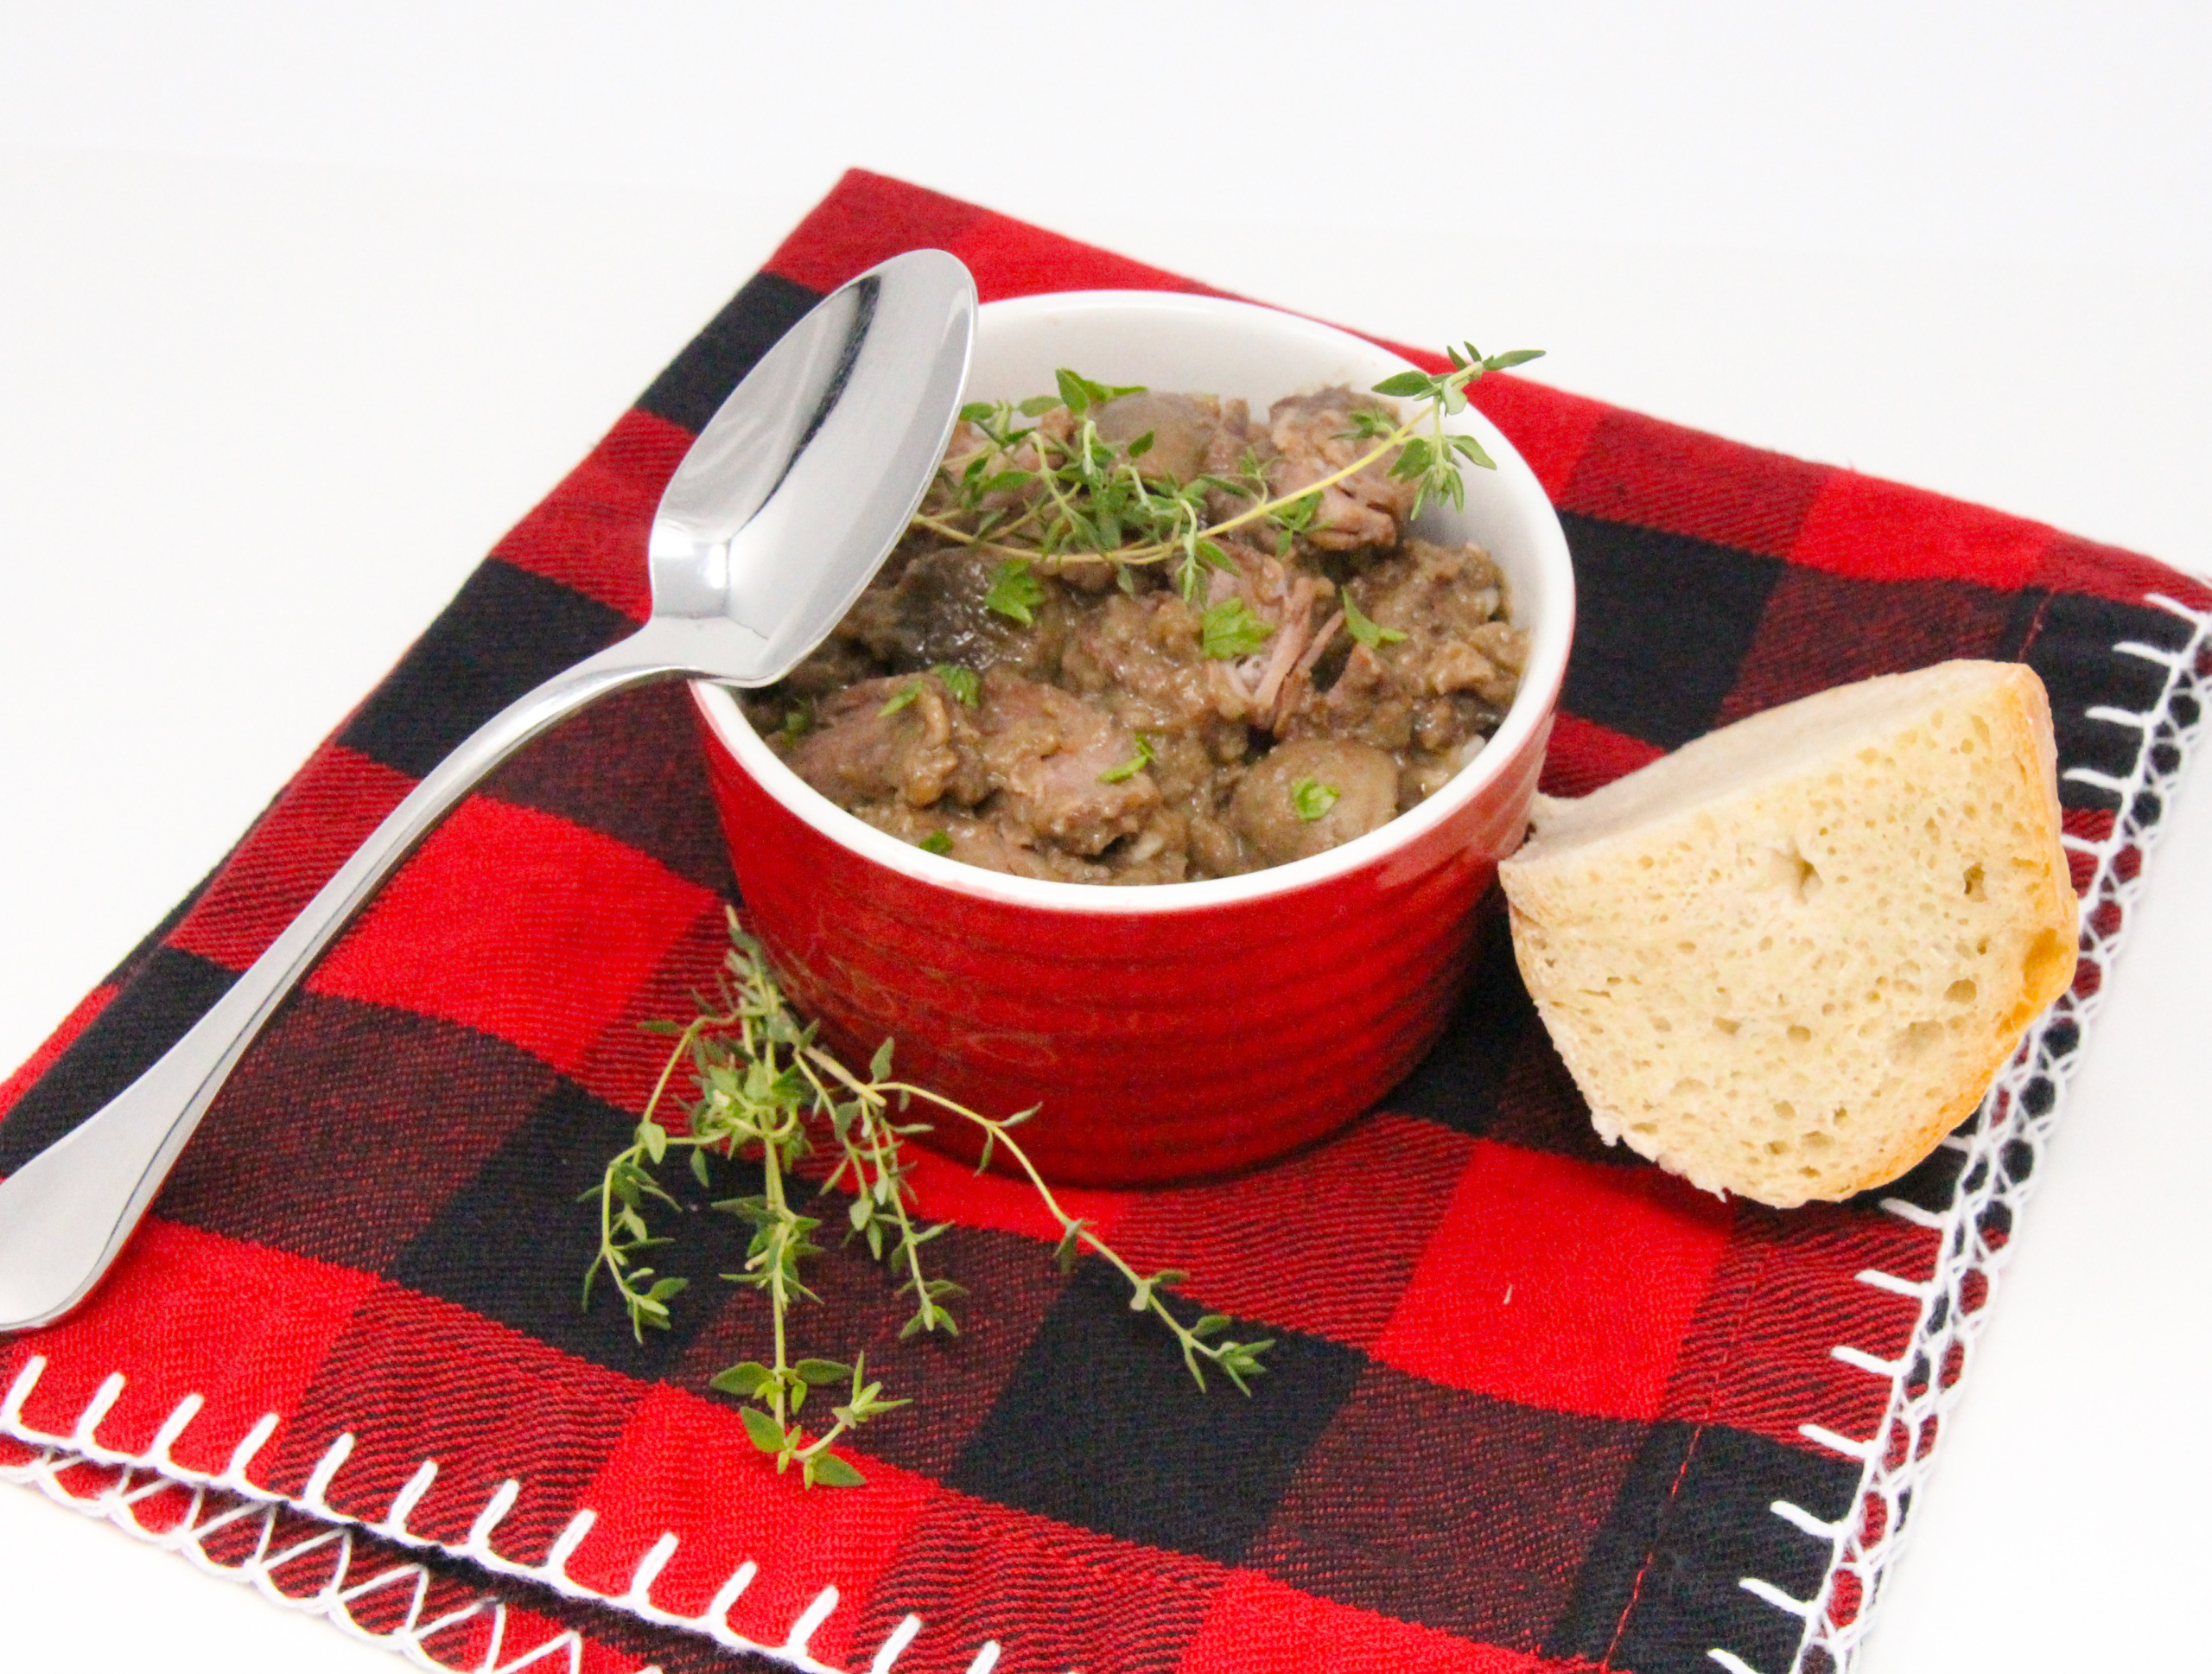 Abe's Irish Steak and Stout Stew is chockful of steak resulting in a hearty dish with meaty, rich flavors. It's pure comfort food for cold, chilly evenings! Recipe shared with permission granted by Maddie Day, author of FOUR LEAF CLEAVER. 